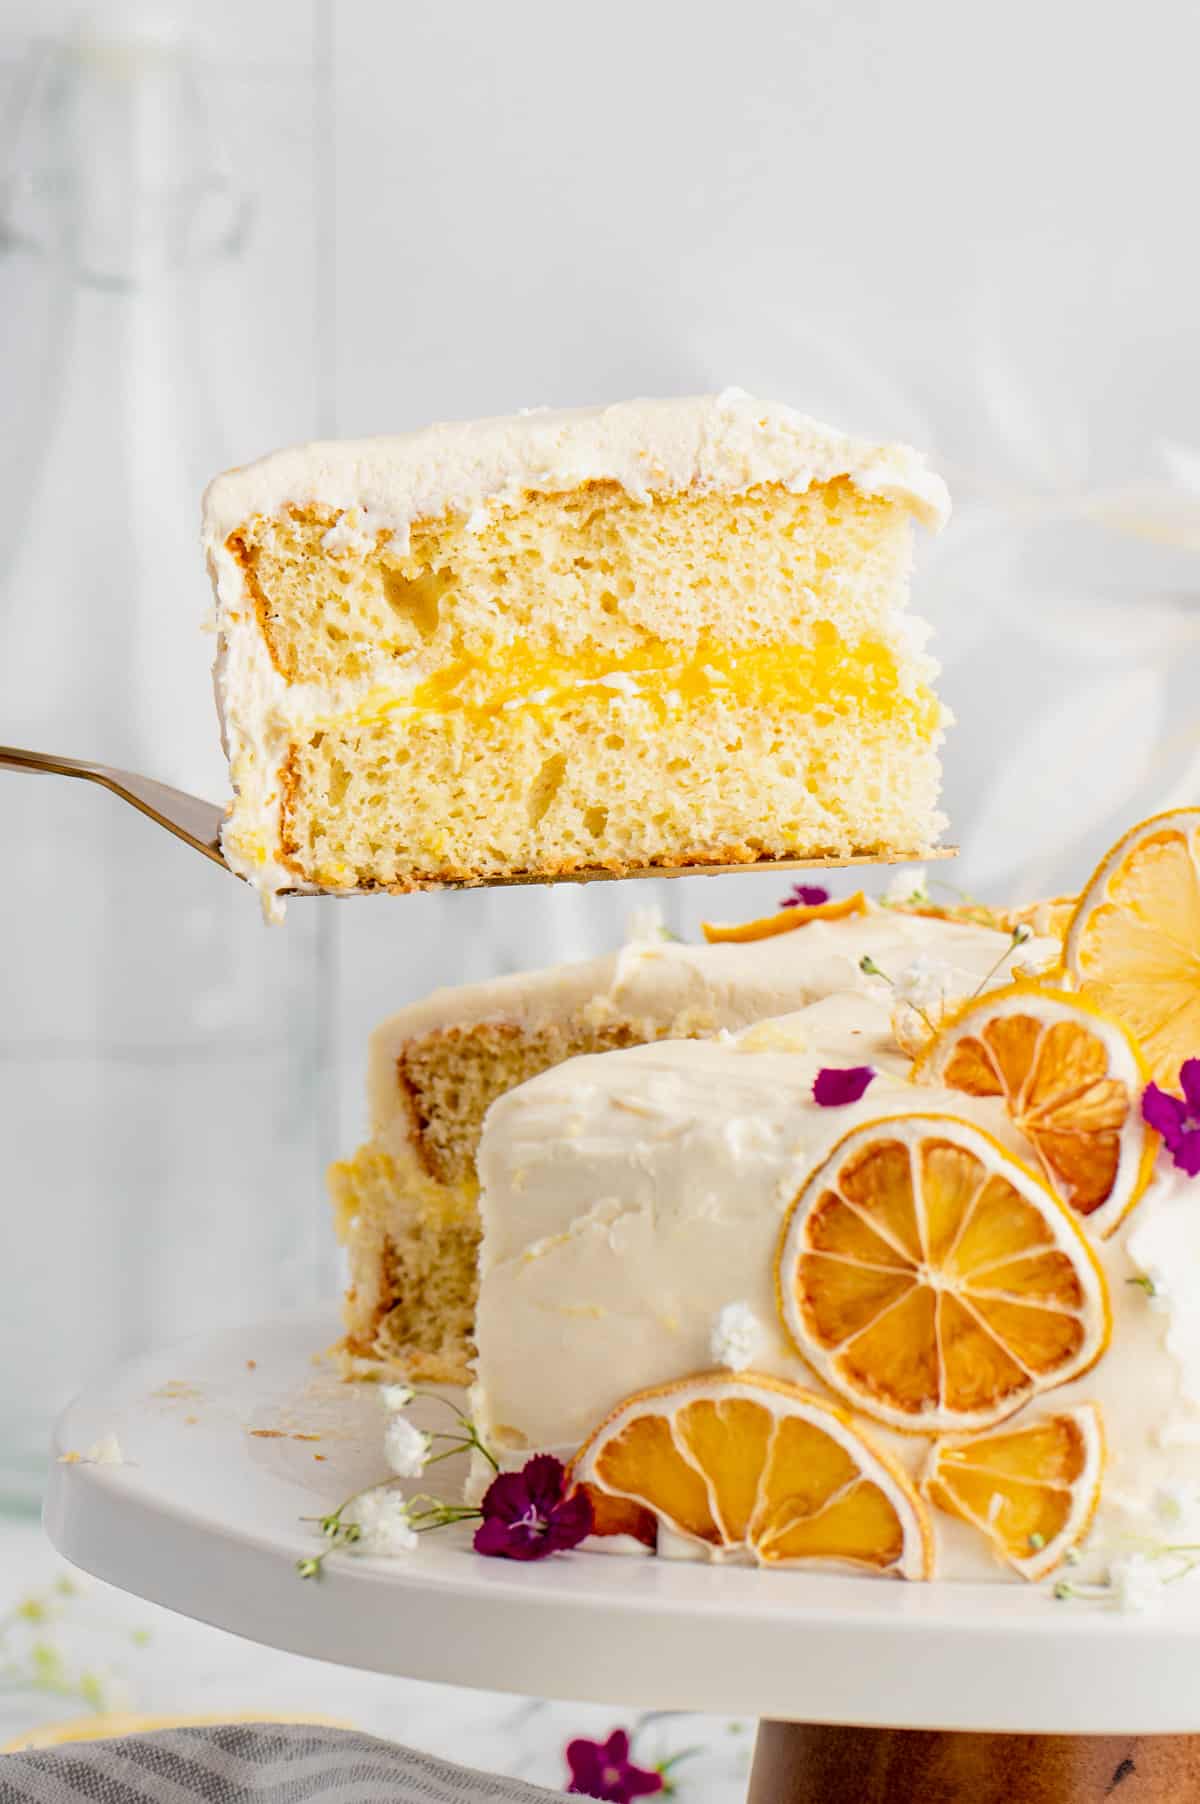 Slice of lemon curd cake being removed from cake with a cake server.